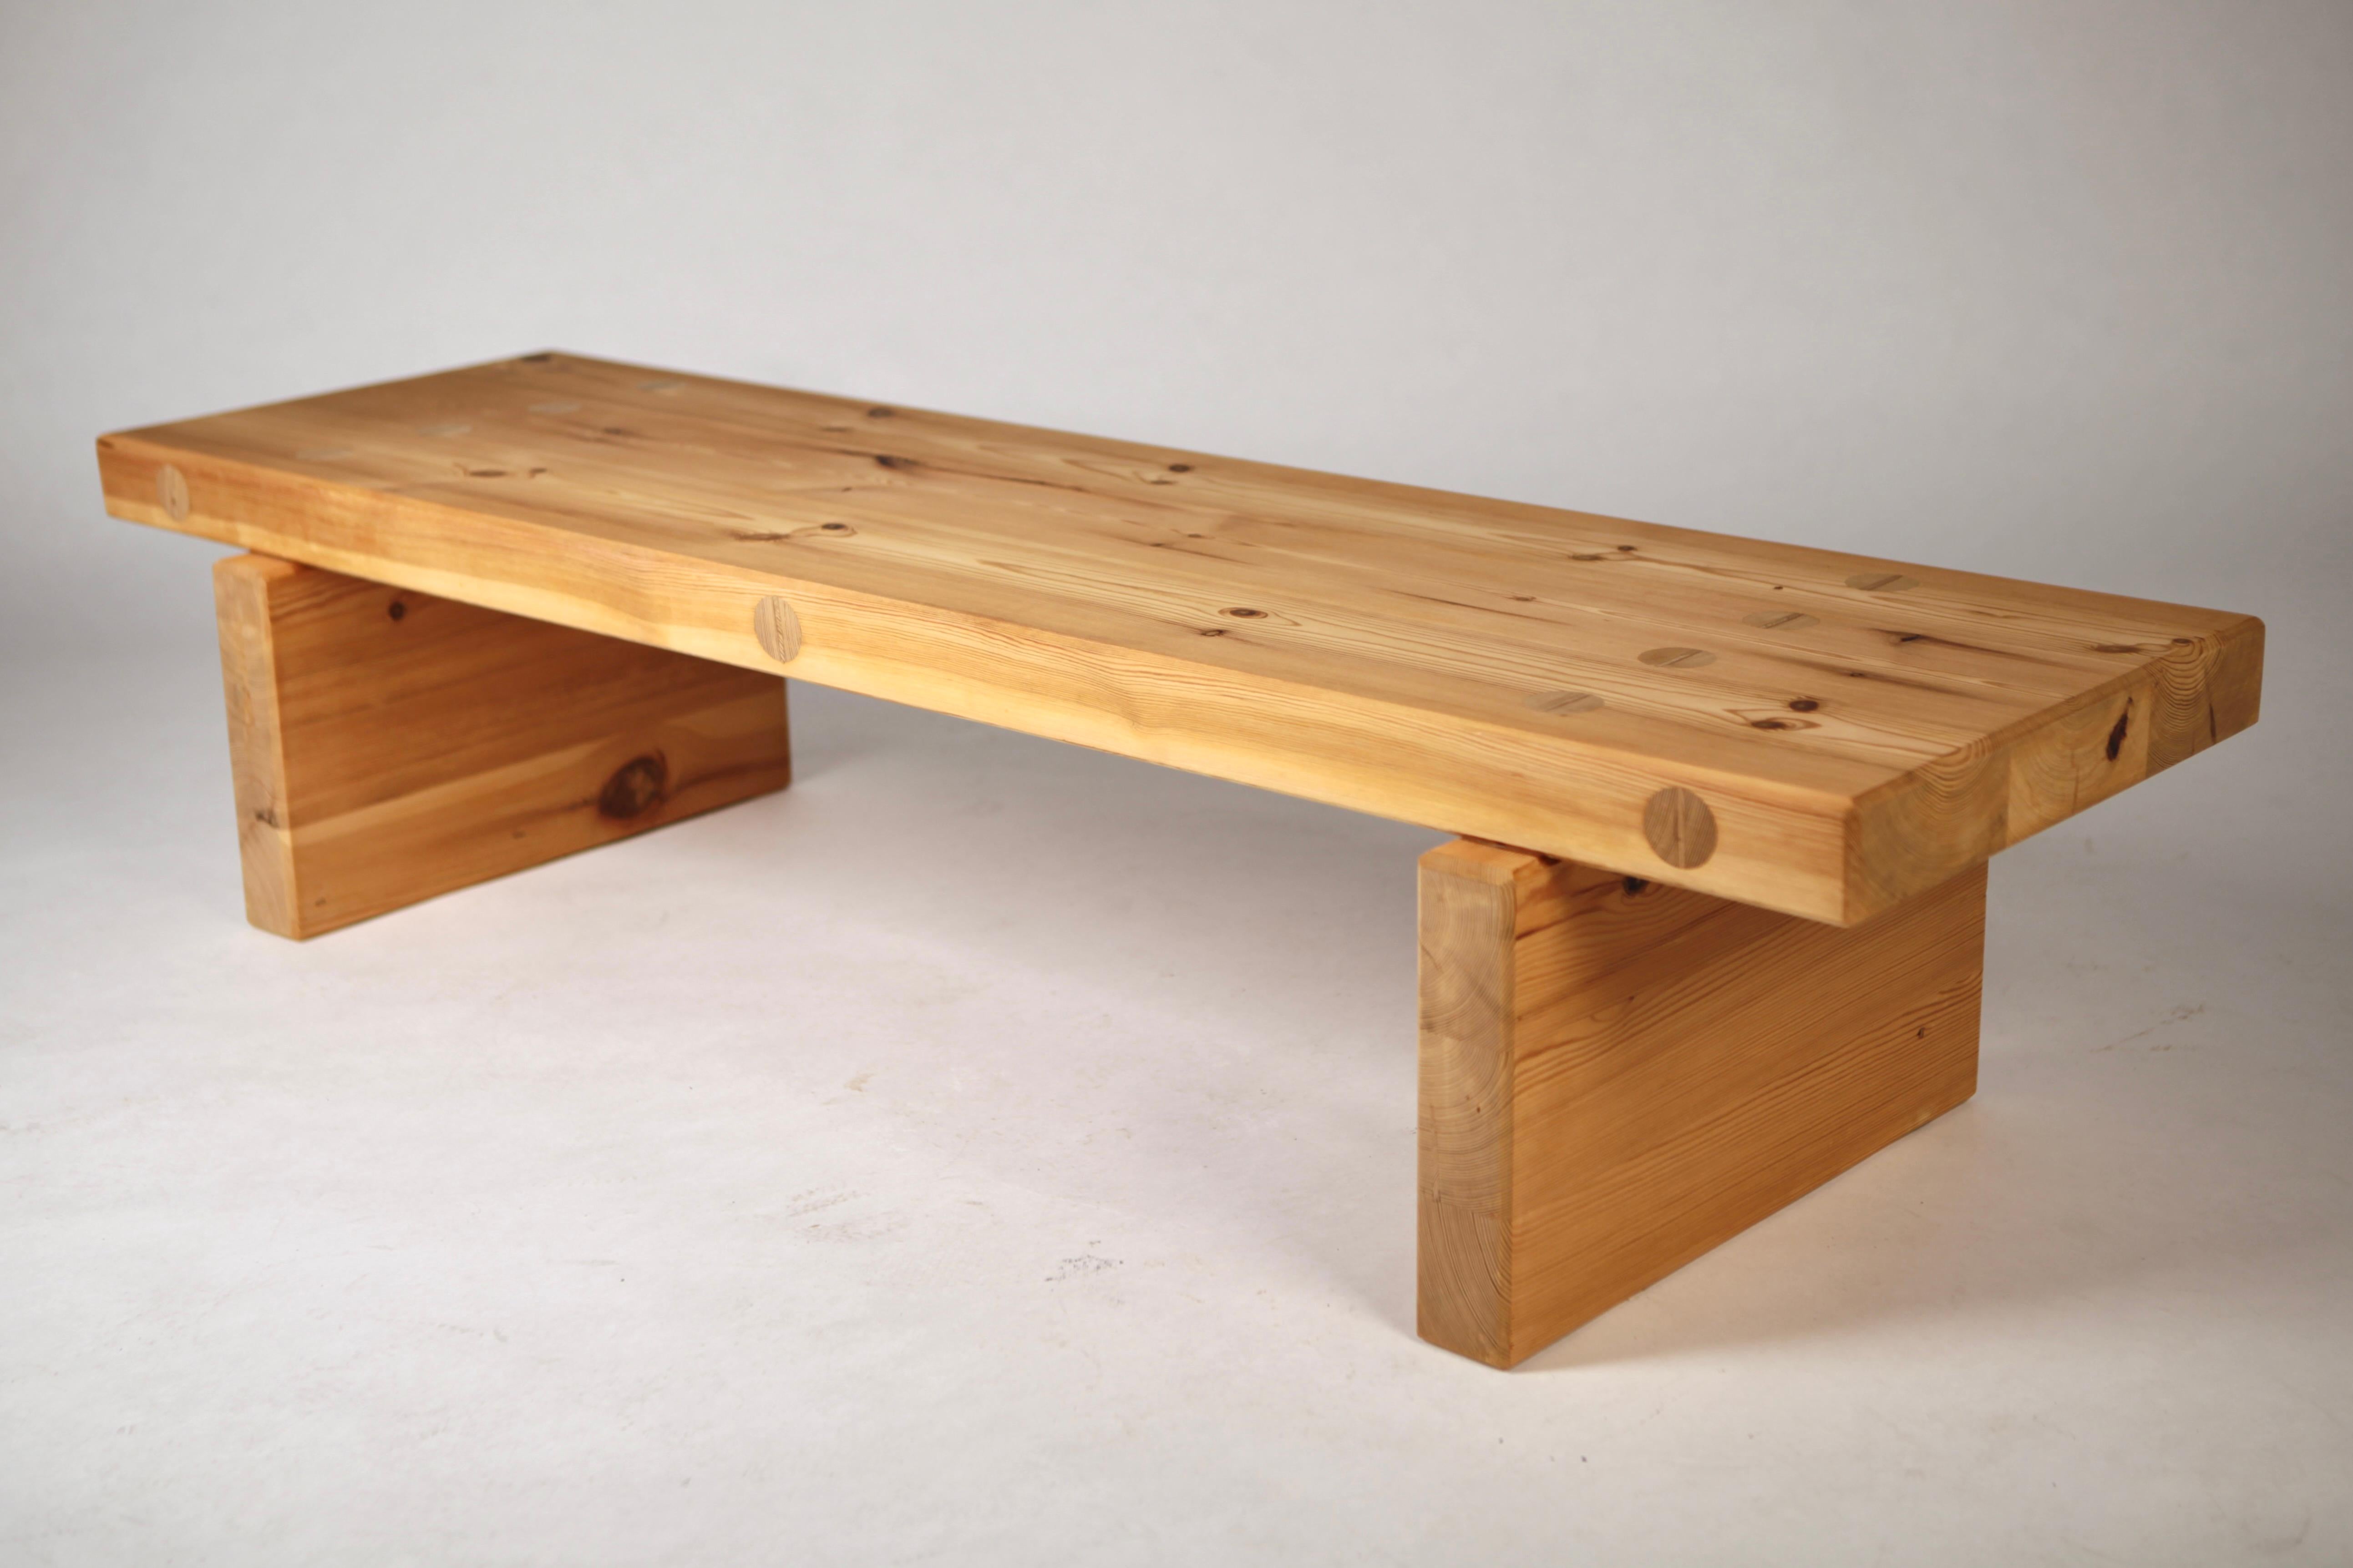 A timeless Scandinavian Modern bench or coffee table in solid thick pine by Roland Wilhelmsson, executed in Sweden, 1970.
Characteristic visible wood joints and great craftsmanship.
Signed to the underside.


